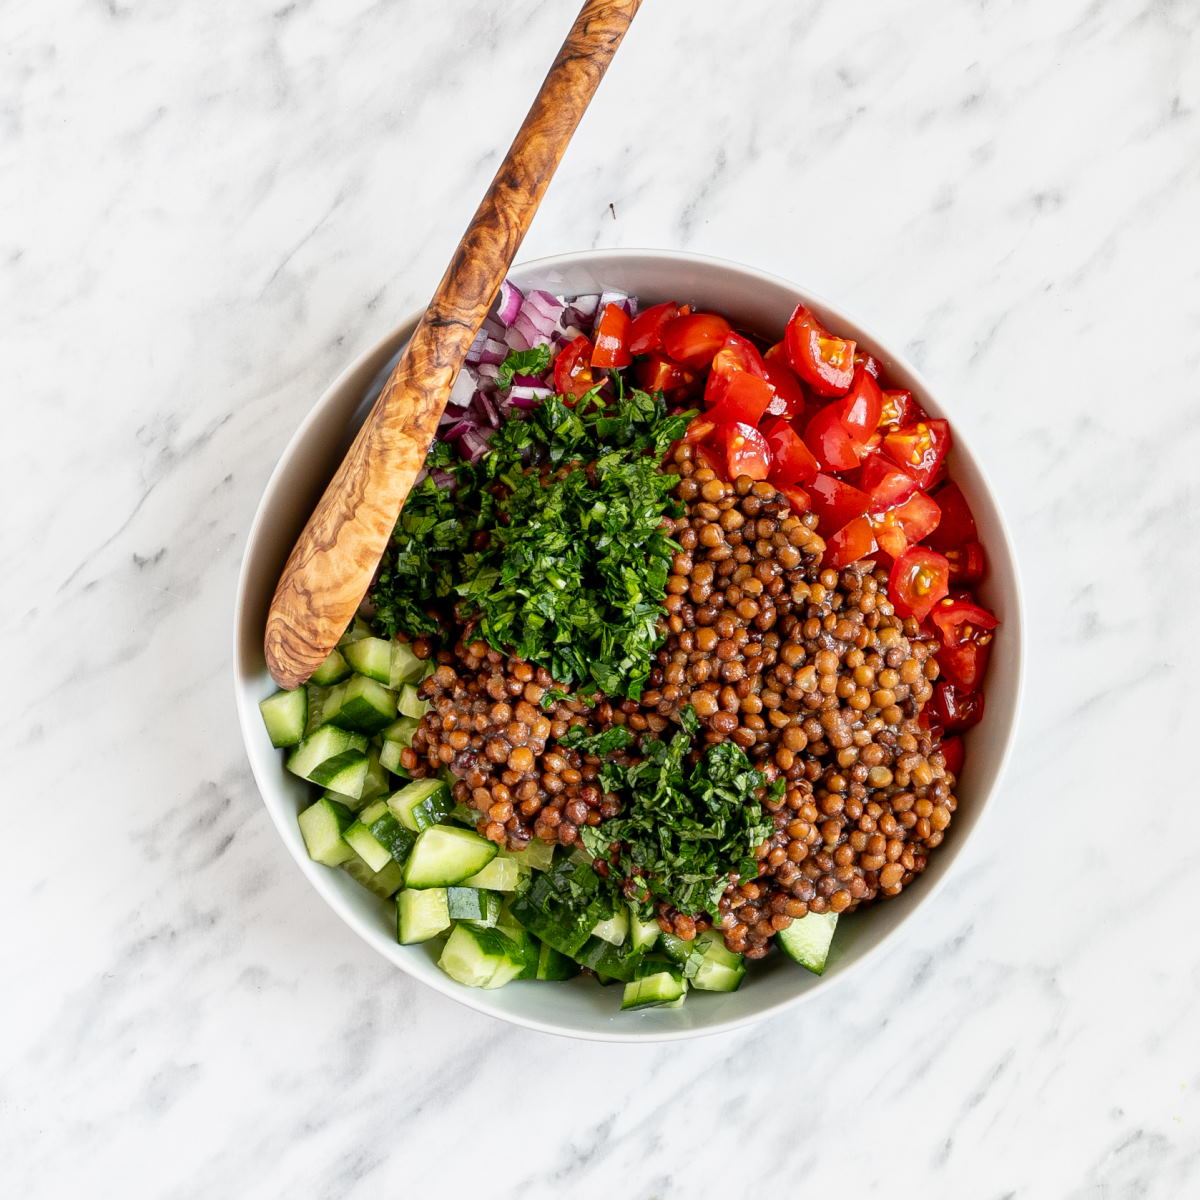 Large white bowl with several chopped ingredients: brown lentils, cucumber, tomatoes, red onion and fresh green herbs. A wooden spoon is placed inside.